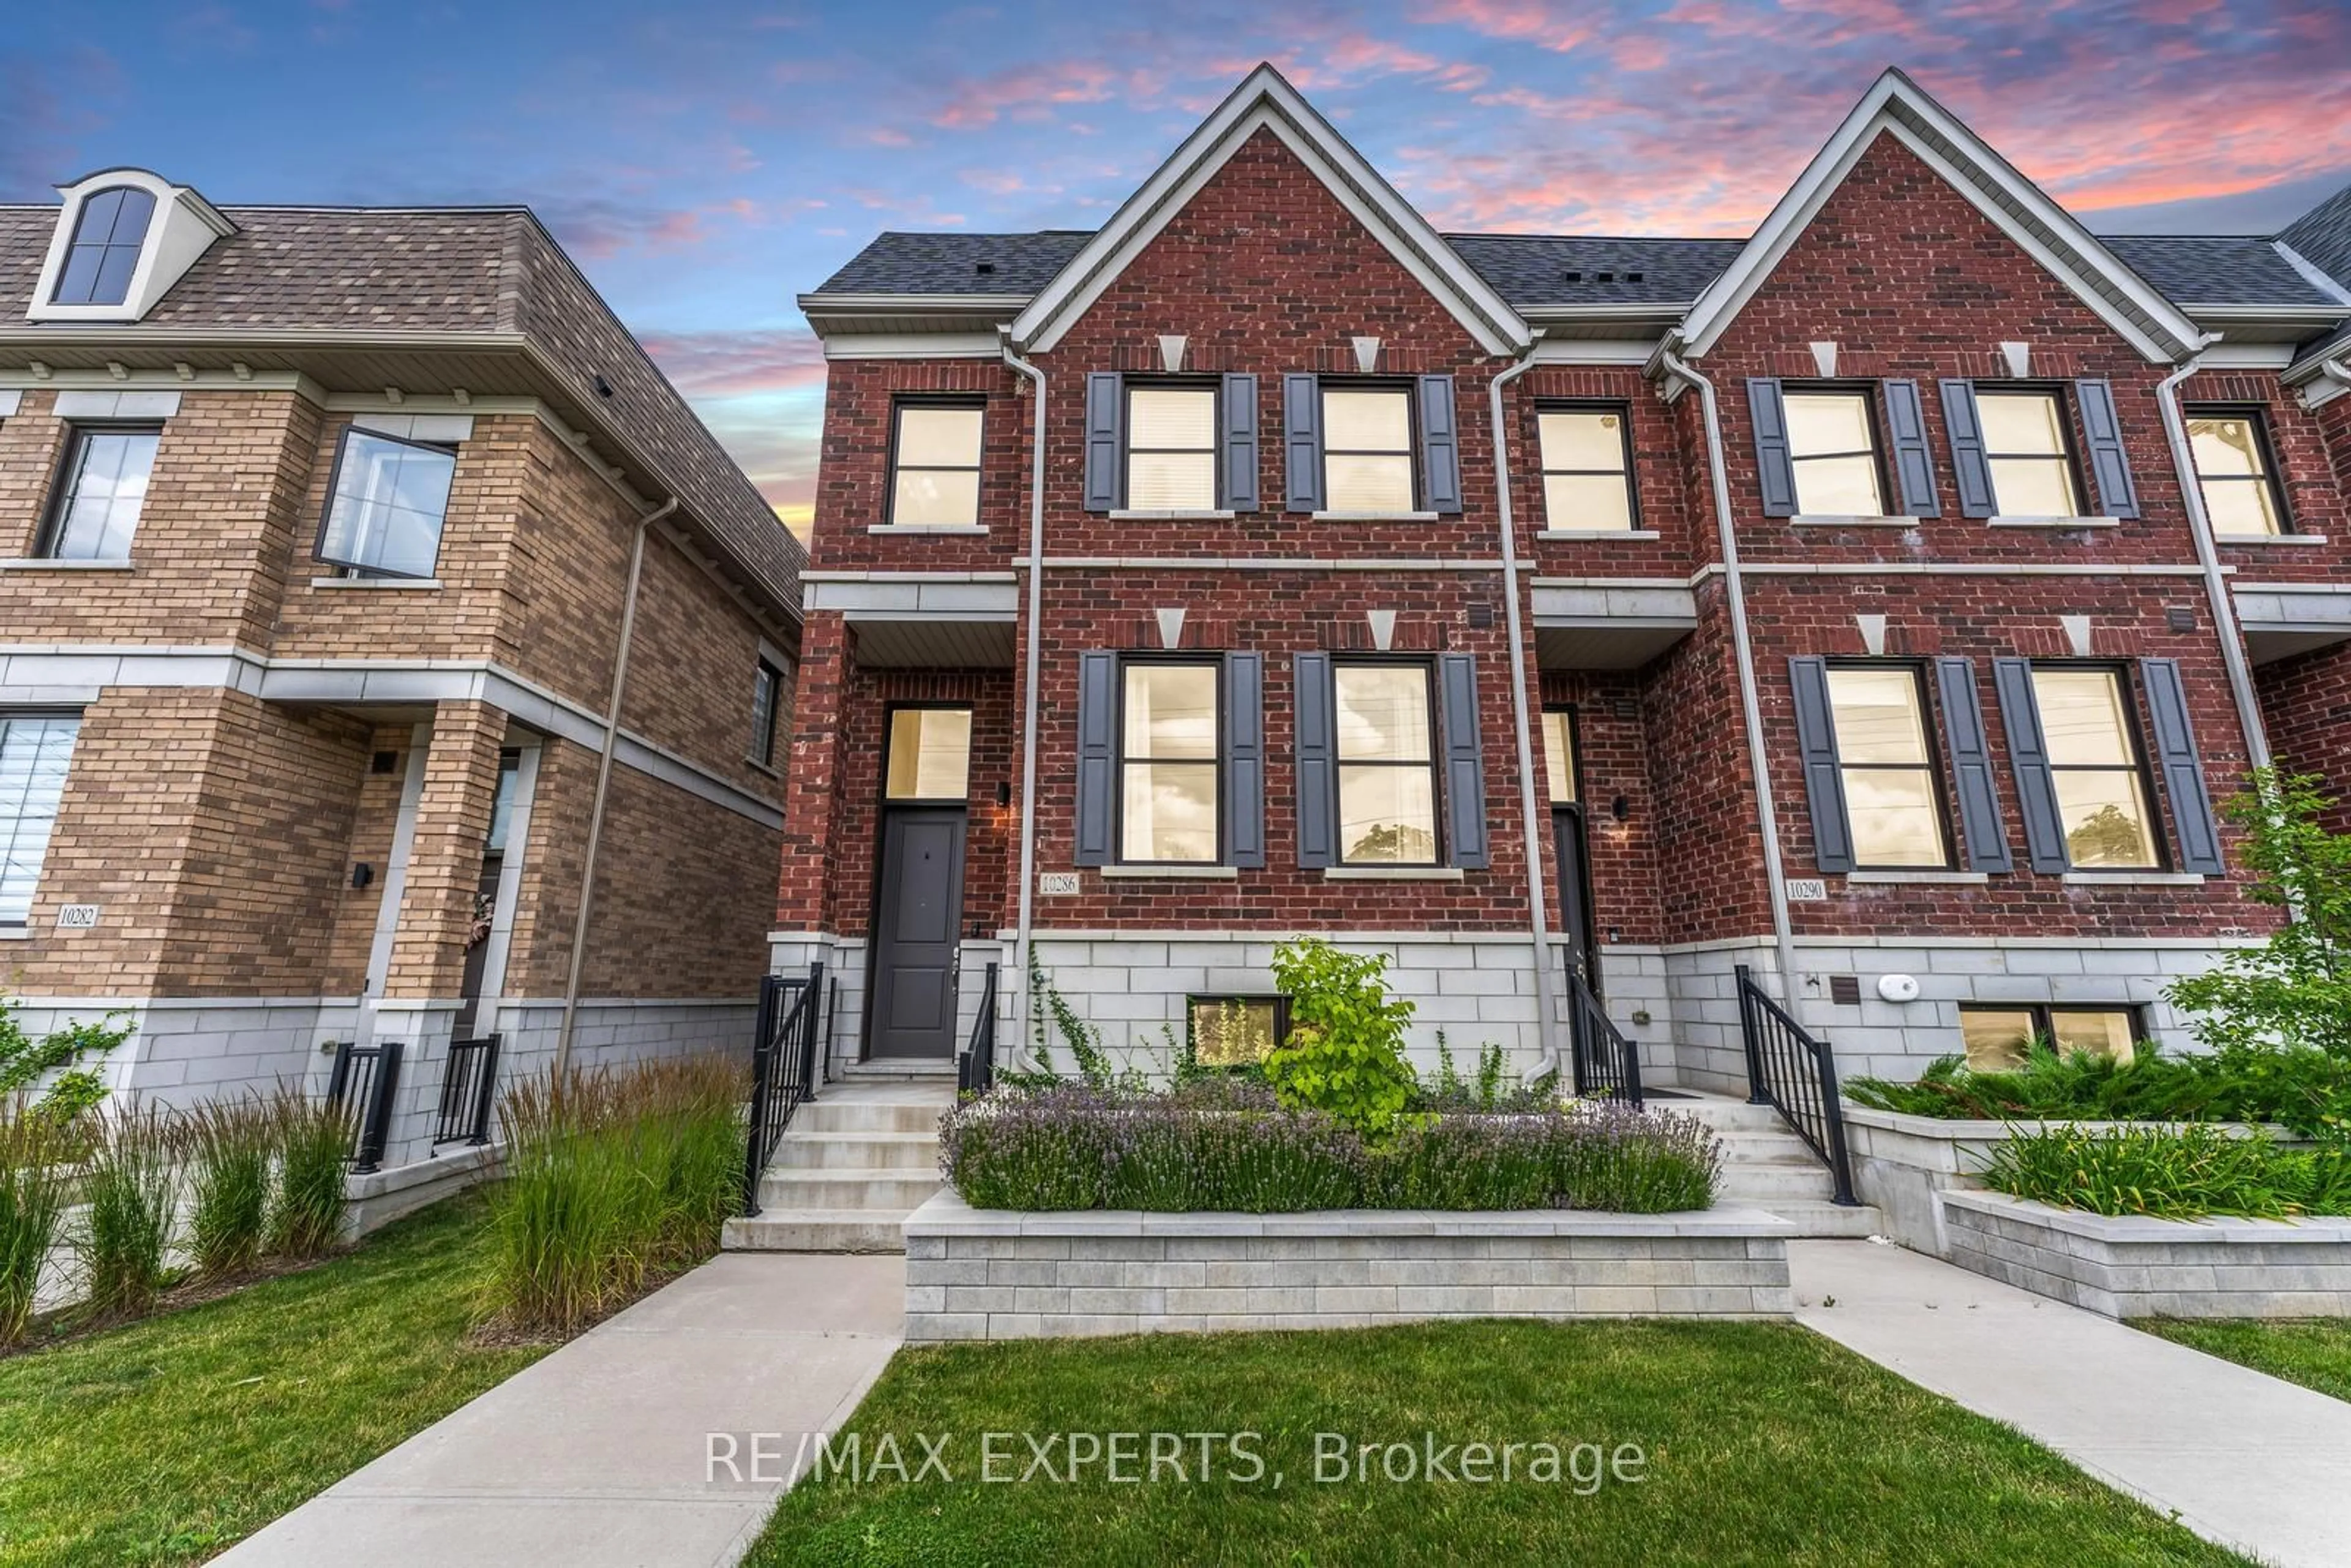 Home with brick exterior material for 10286 Keele St, Vaughan Ontario L6A 1G3